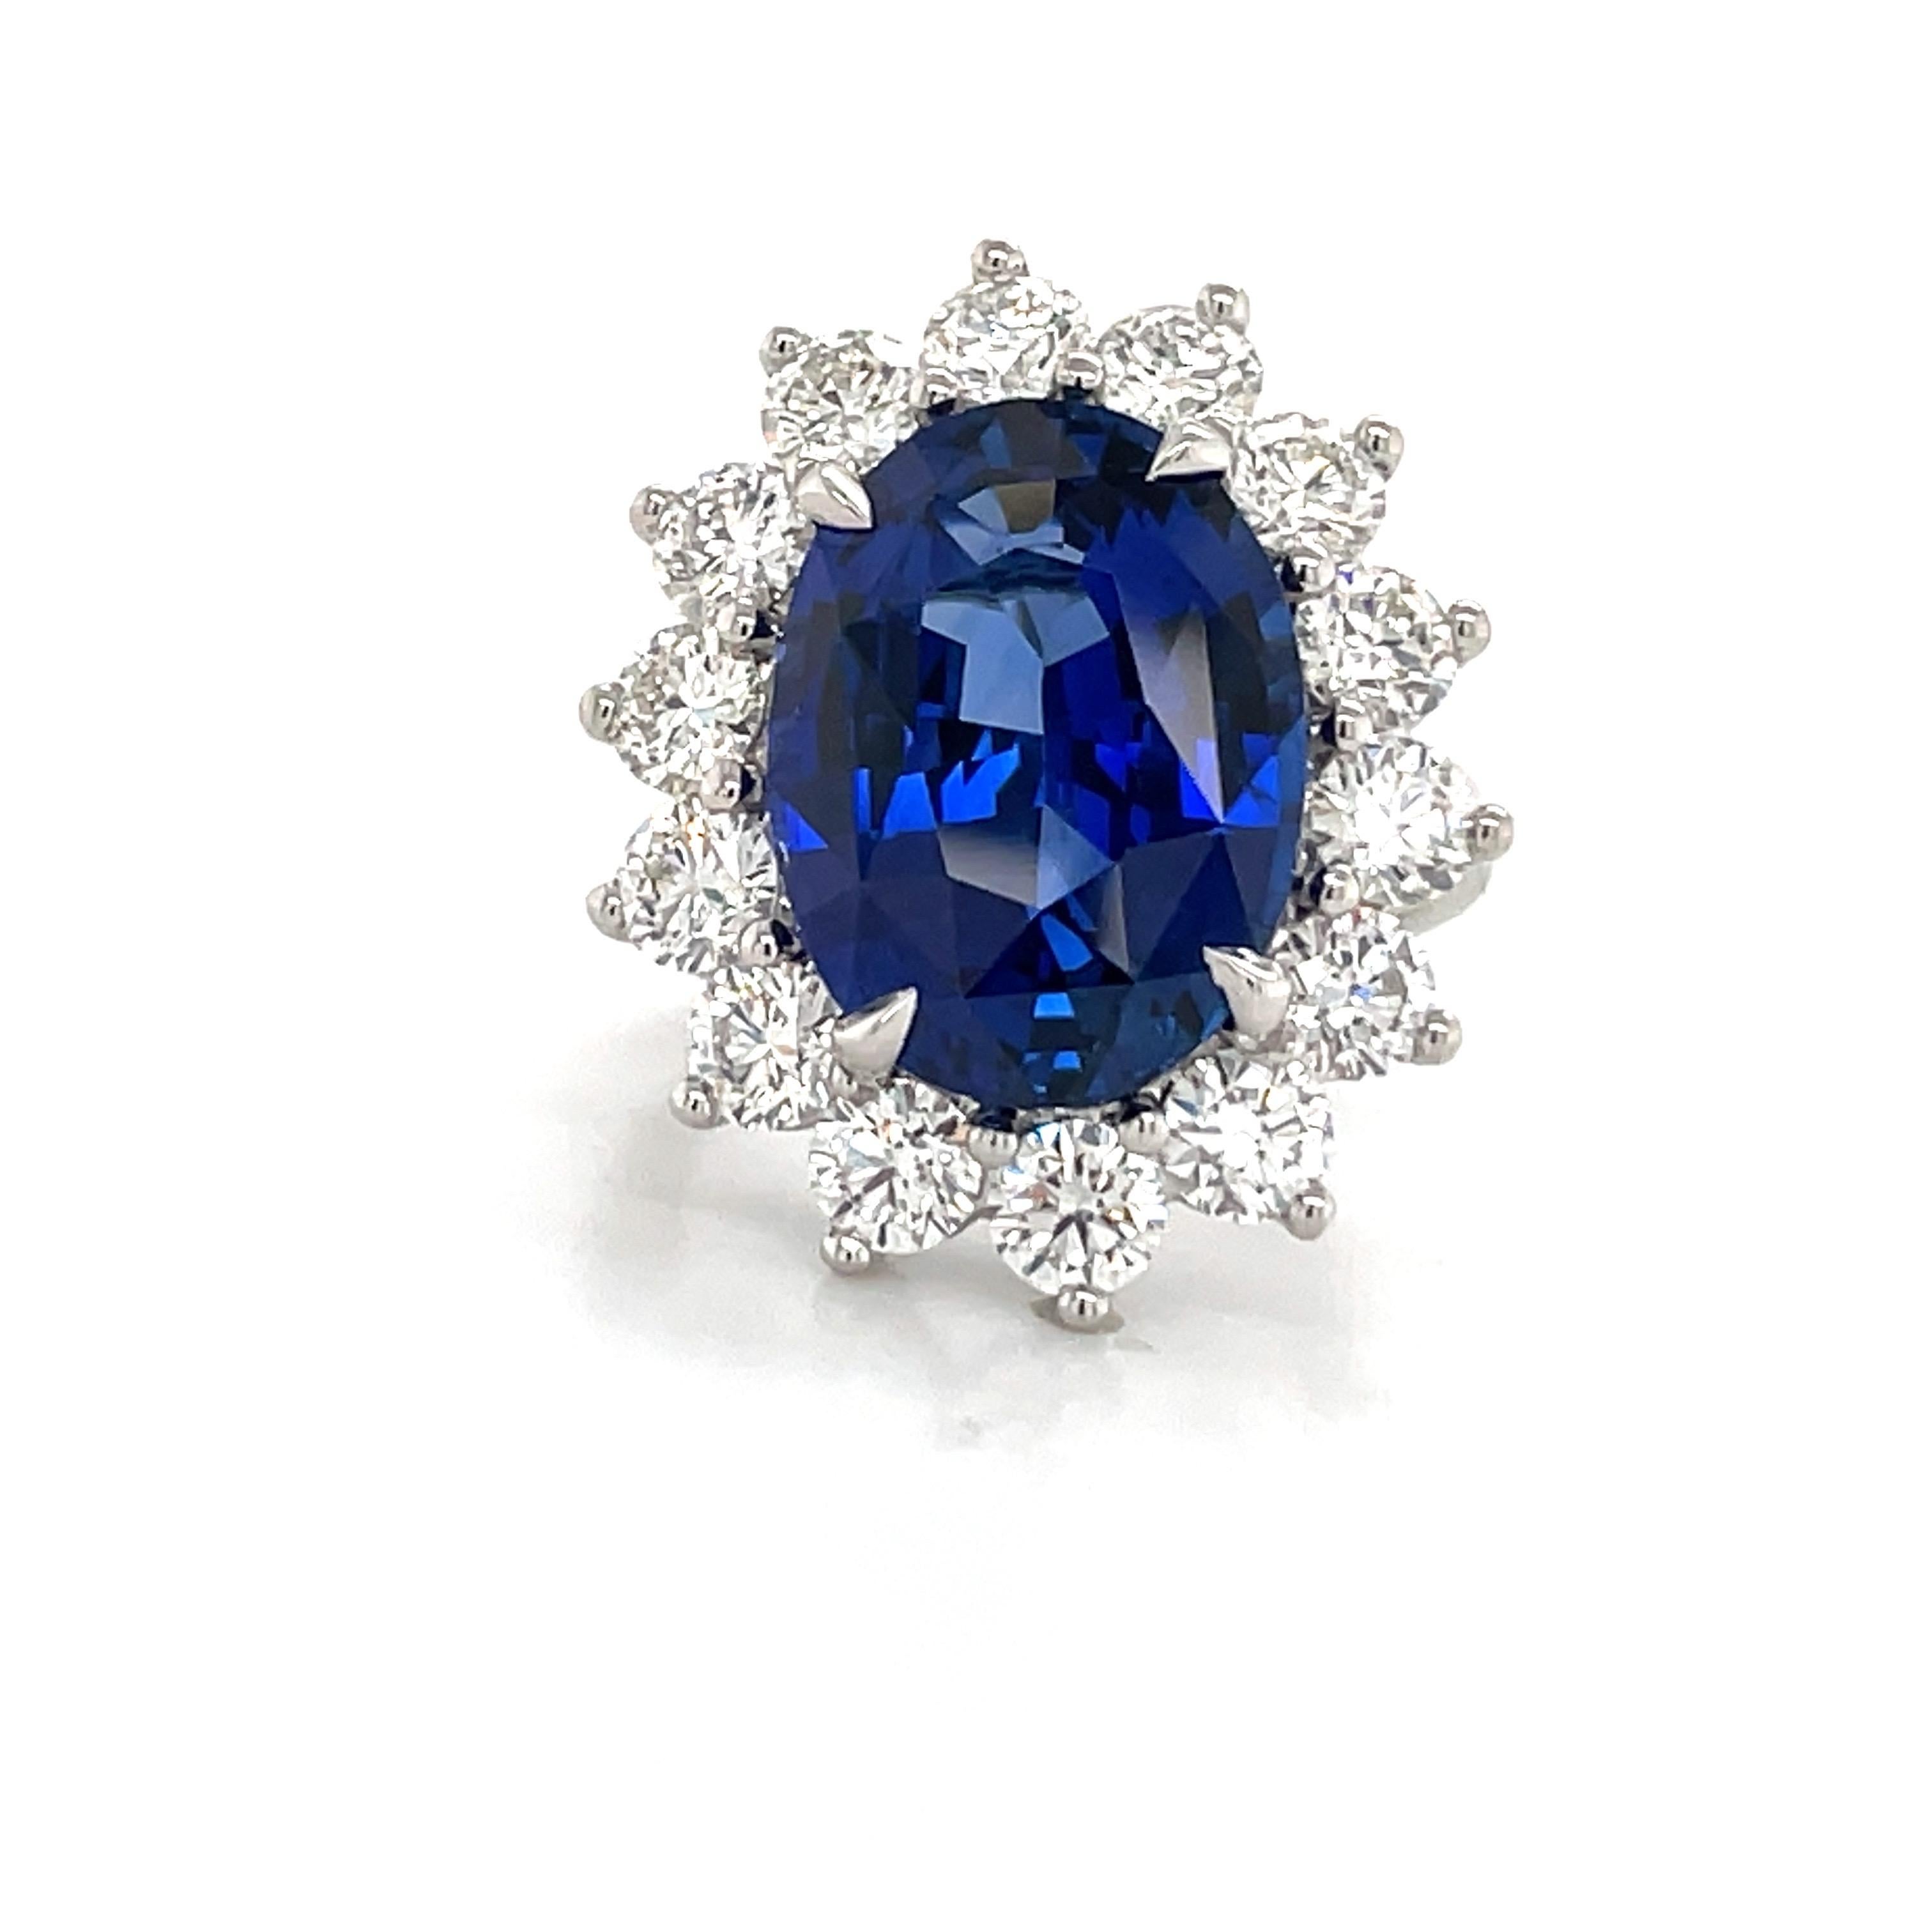 Princess Diane inspired cocktail ring featuring one GIA Certified Oval Sapphire weighing 12.06 carats flanked with 14 round brilliants weighing 3.25, crafted in Platinum.

Sapphire:
Origin: Madagascar
Measurements: 16.35 x 12.08 x 7.33 mm
Sapphire